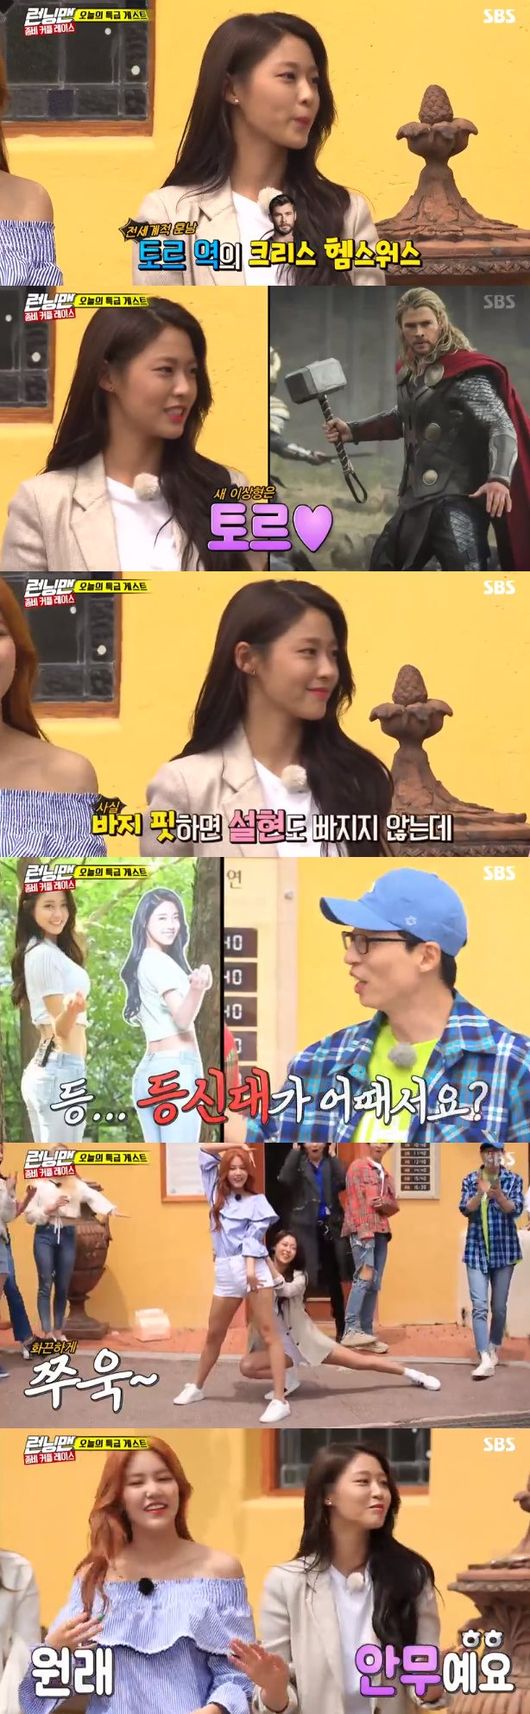 Girl group AOA Seolhyun has devastated Running Man with its appearance alone.In the SBS entertainment Running Man broadcasted on the 27th, girl group AOA Seolhyun, Hyejeong, Momo Land Jui, space girl Dayoung and Winner Kang Seung-yoon Song Min-ho appeared as guests.The members cheered when Seolhyun appeared on the day.In particular, Lee Kwang-soo claimed that Seolhyun had a love line with me in the past, and he was criticized by other members. In the past, Seolhyun went out of the data screen that received Lee Kwang-soos rose, not Gary.But Seolhyun responded firmly to Lee Kwang-soos question, Do you remember? by Yes, prompting a rave.Later members also asked Seolhyun about his ideal.When Yoo Jae-Suk was lucky that Seolhyun named Song Jung-ki as his ideal type in the past, Kim Jong-kook said, But I got married. Who is it now?Seolhyun replied, I am not Korean now. And I gathered my attention by referring to Chris Hemsworth, the main character of the movie Tor. Soon after, Seolhyun showed the point choreography of AOAs new song Bingle Bangle with Hyejeong, and the members were impressed with the addictive melody and choreography.The members of the two peoples impressive closing choreography doubted that they had prepared in advance.So, Seolhyun and Hyejeong explained that the original choreography is like this and helped them understand.The members then conducted a mission to find two mother-of-two: The Dead are Among Us and one vaccine human, and before that they tried to match the couple.The most popular was Seolhyun, and Kim Jong-kook, who eventually posed for a heart like Seolhyun, became his partner on the day.Above all, Kim Jong-kook laughed as Seolhyun denied until the end when he was suspected of being Zombie 2: The Dead are Among Us.In addition to this, Seolhyun, who was honestly envious when Jeon So-min and Song Min-ho came to the same gold necklace on the day, or gathered his gaze with passion not to buy his body in the last mission performance.He showed his presence with beautiful beauty and wrong artistic sense. He gathered hot topics after the broadcast and once again realized his popularity.On the other hand, the mother Zombie 2: The Dead are Among Us was Yoo Jae-Suk and Hyejeong, and the vaccine was Song Min-ho.The victory was won by a human team that included Seolhyun as the members uncovered the motherhood 2: The Dead are Among Us.Running Man screen captures